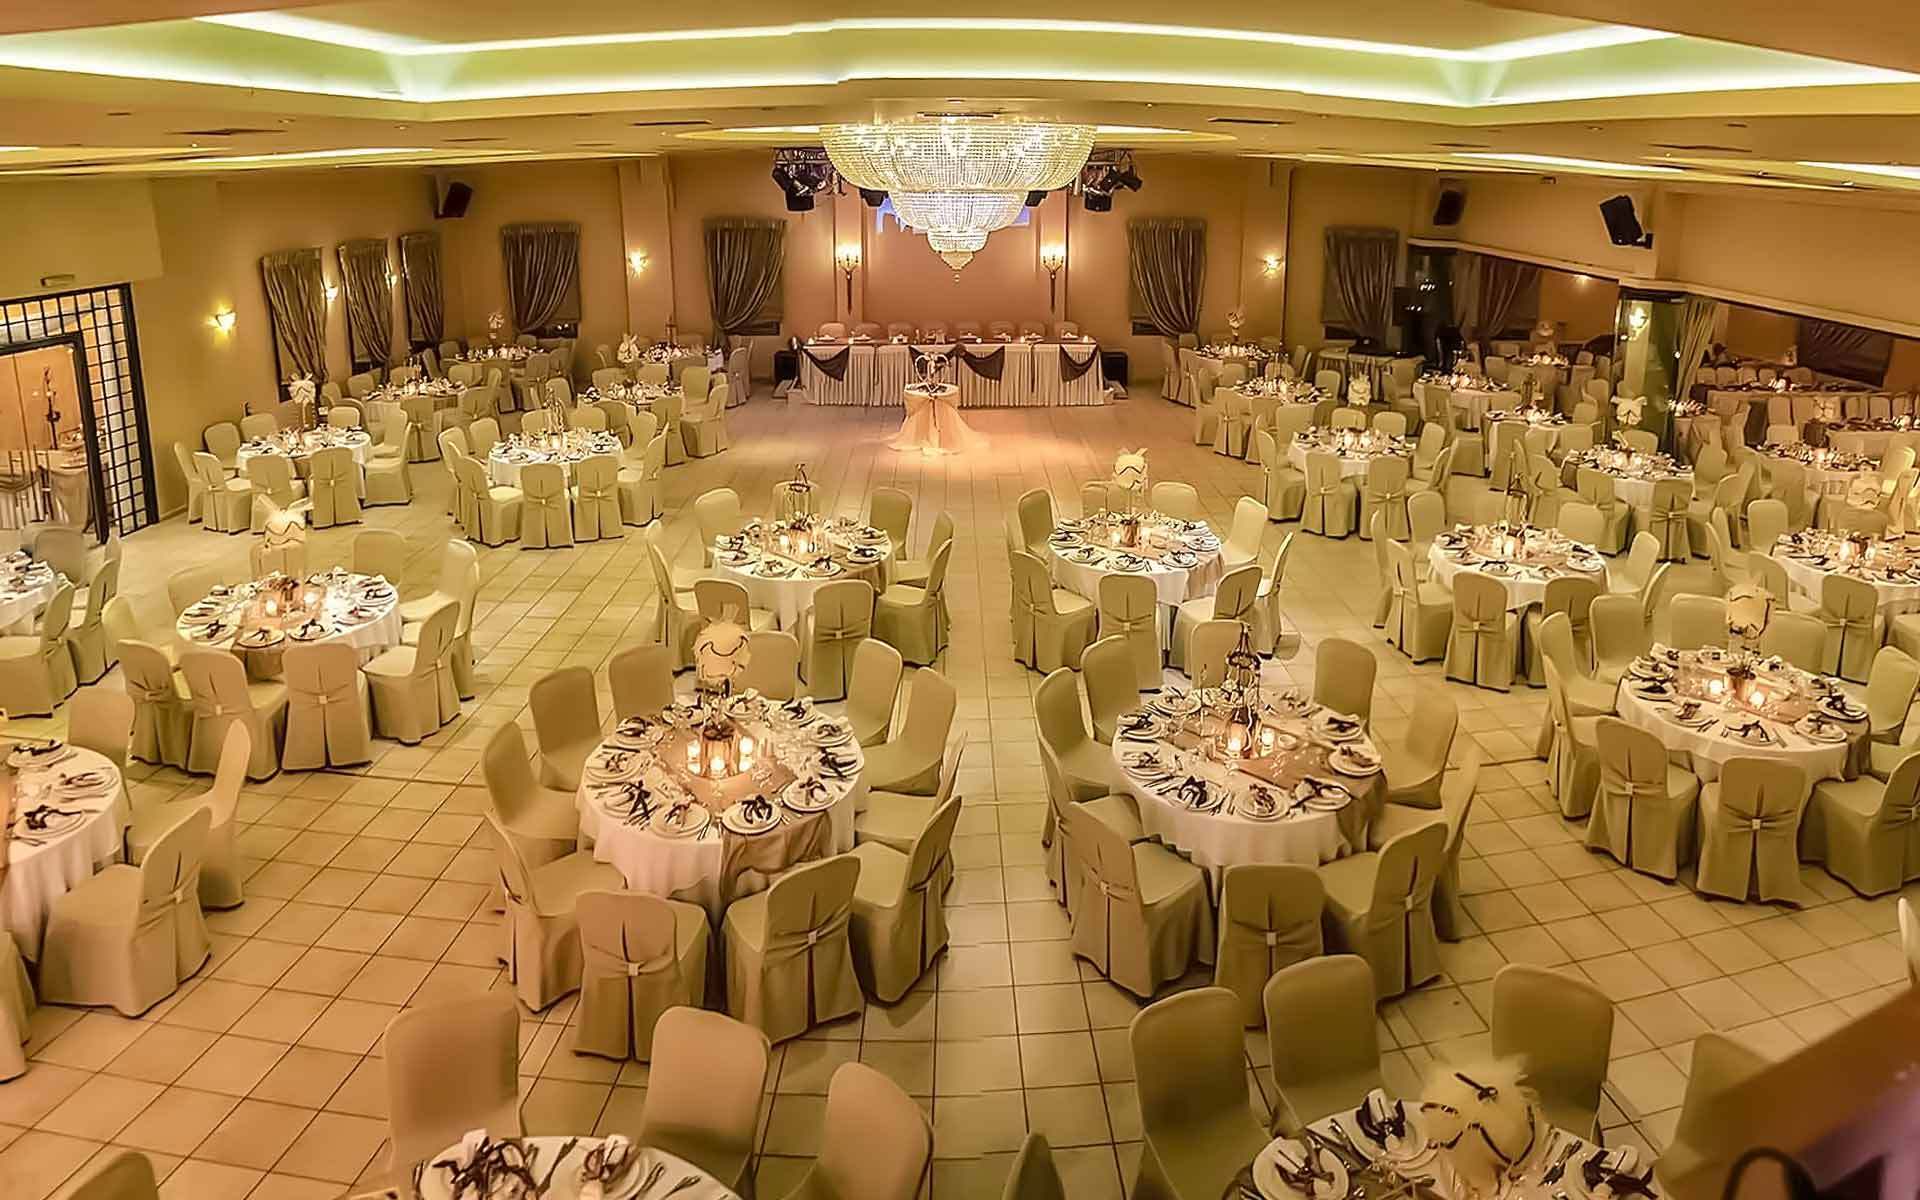 ktima-diamanti wedding reception venue, set up for 500 guests by dDamond Events